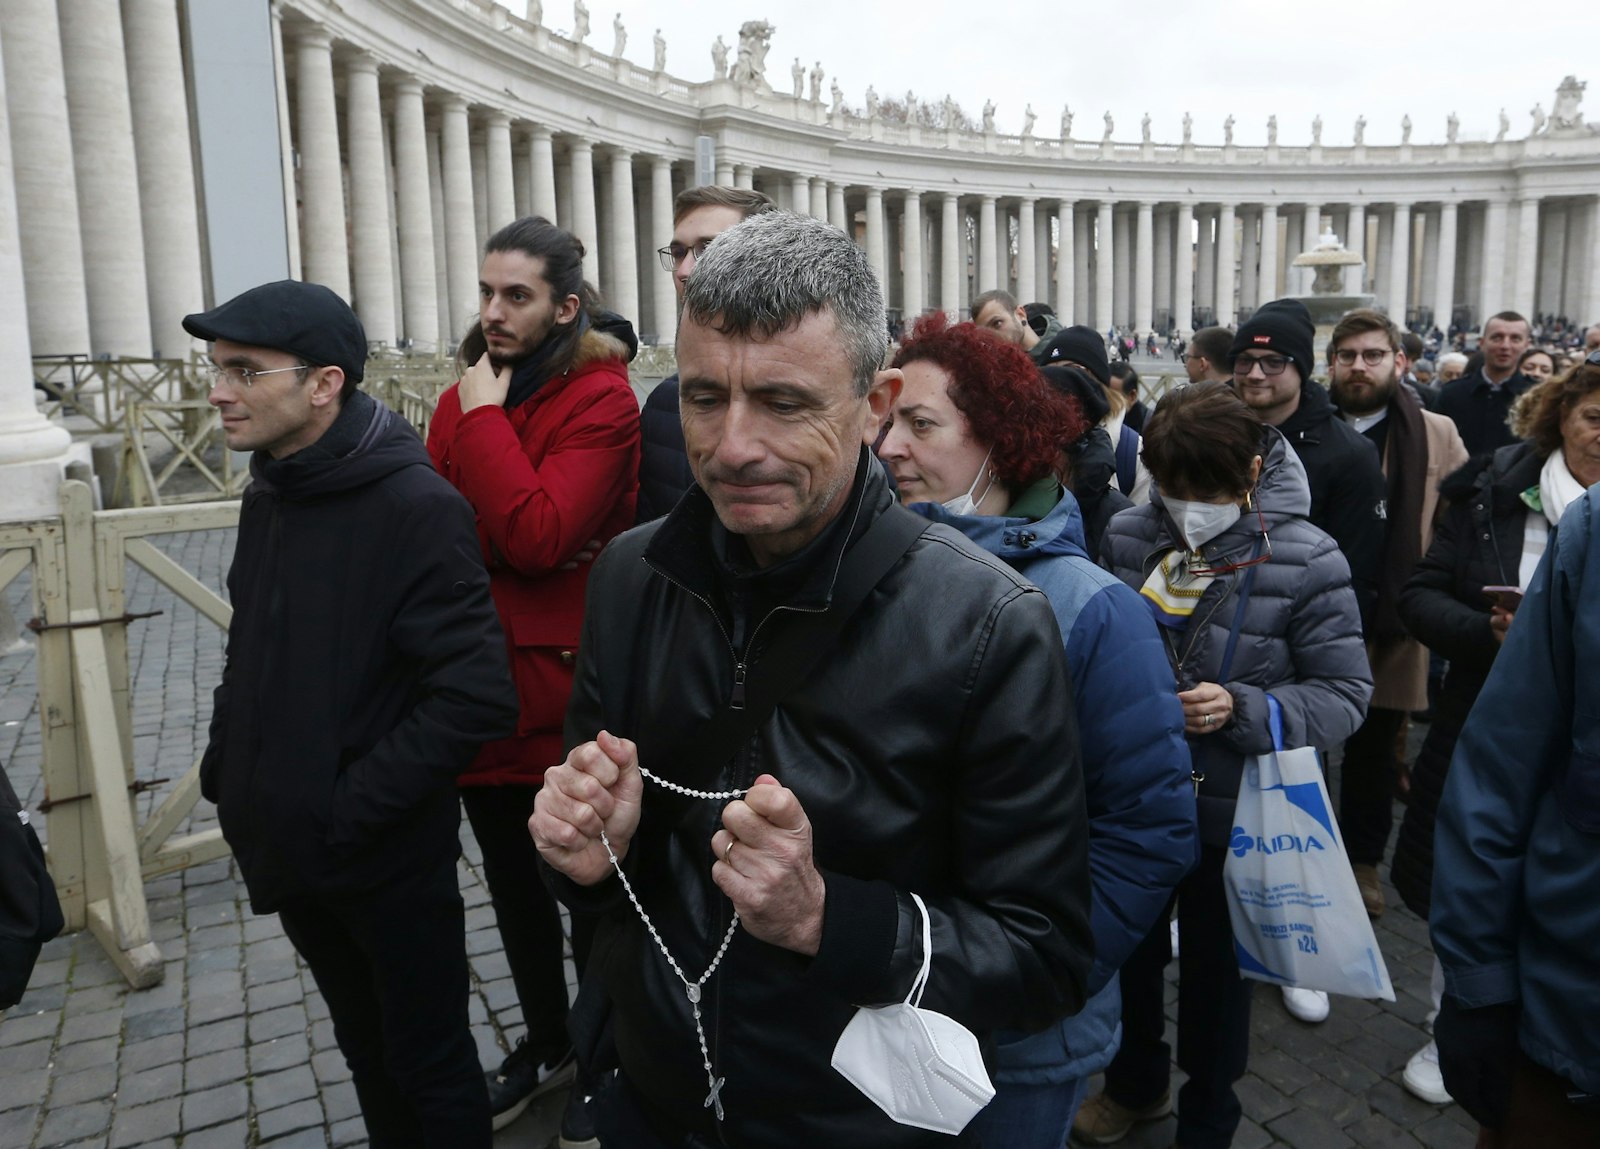 A man holds a rosary as people wait in line to enter St. Peter's Basilica to view the body of Pope Benedict XVI at the Vatican Jan. 2, 2023. (CNS photo/Paul Haring)